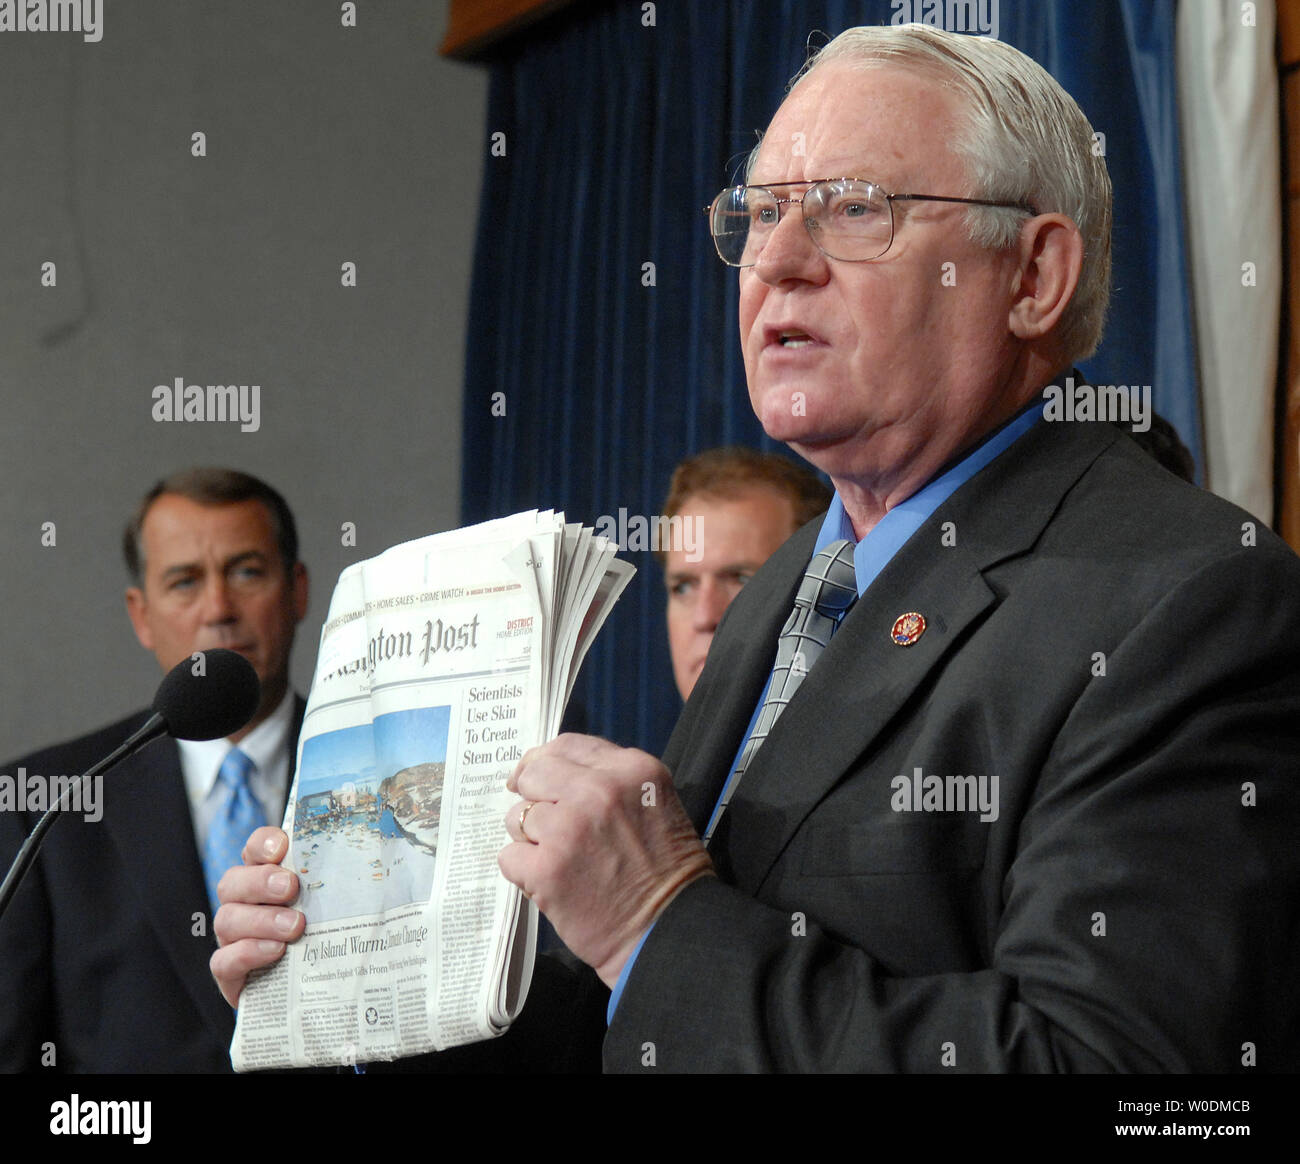 Rep. Joseph Pitts, R-PA, holds a 'Washington Post' newspaper with a headline regarding adult stem cell research during a news conference on Capitol Hill in Washington on June 7, 2007. The Republicans say they have enough votes to sustain a Presidential veto of a bill recently passed by Congress that funds embryonic stem cell research.  (UPI Photo/Roger L. Wollenberg) Stock Photo